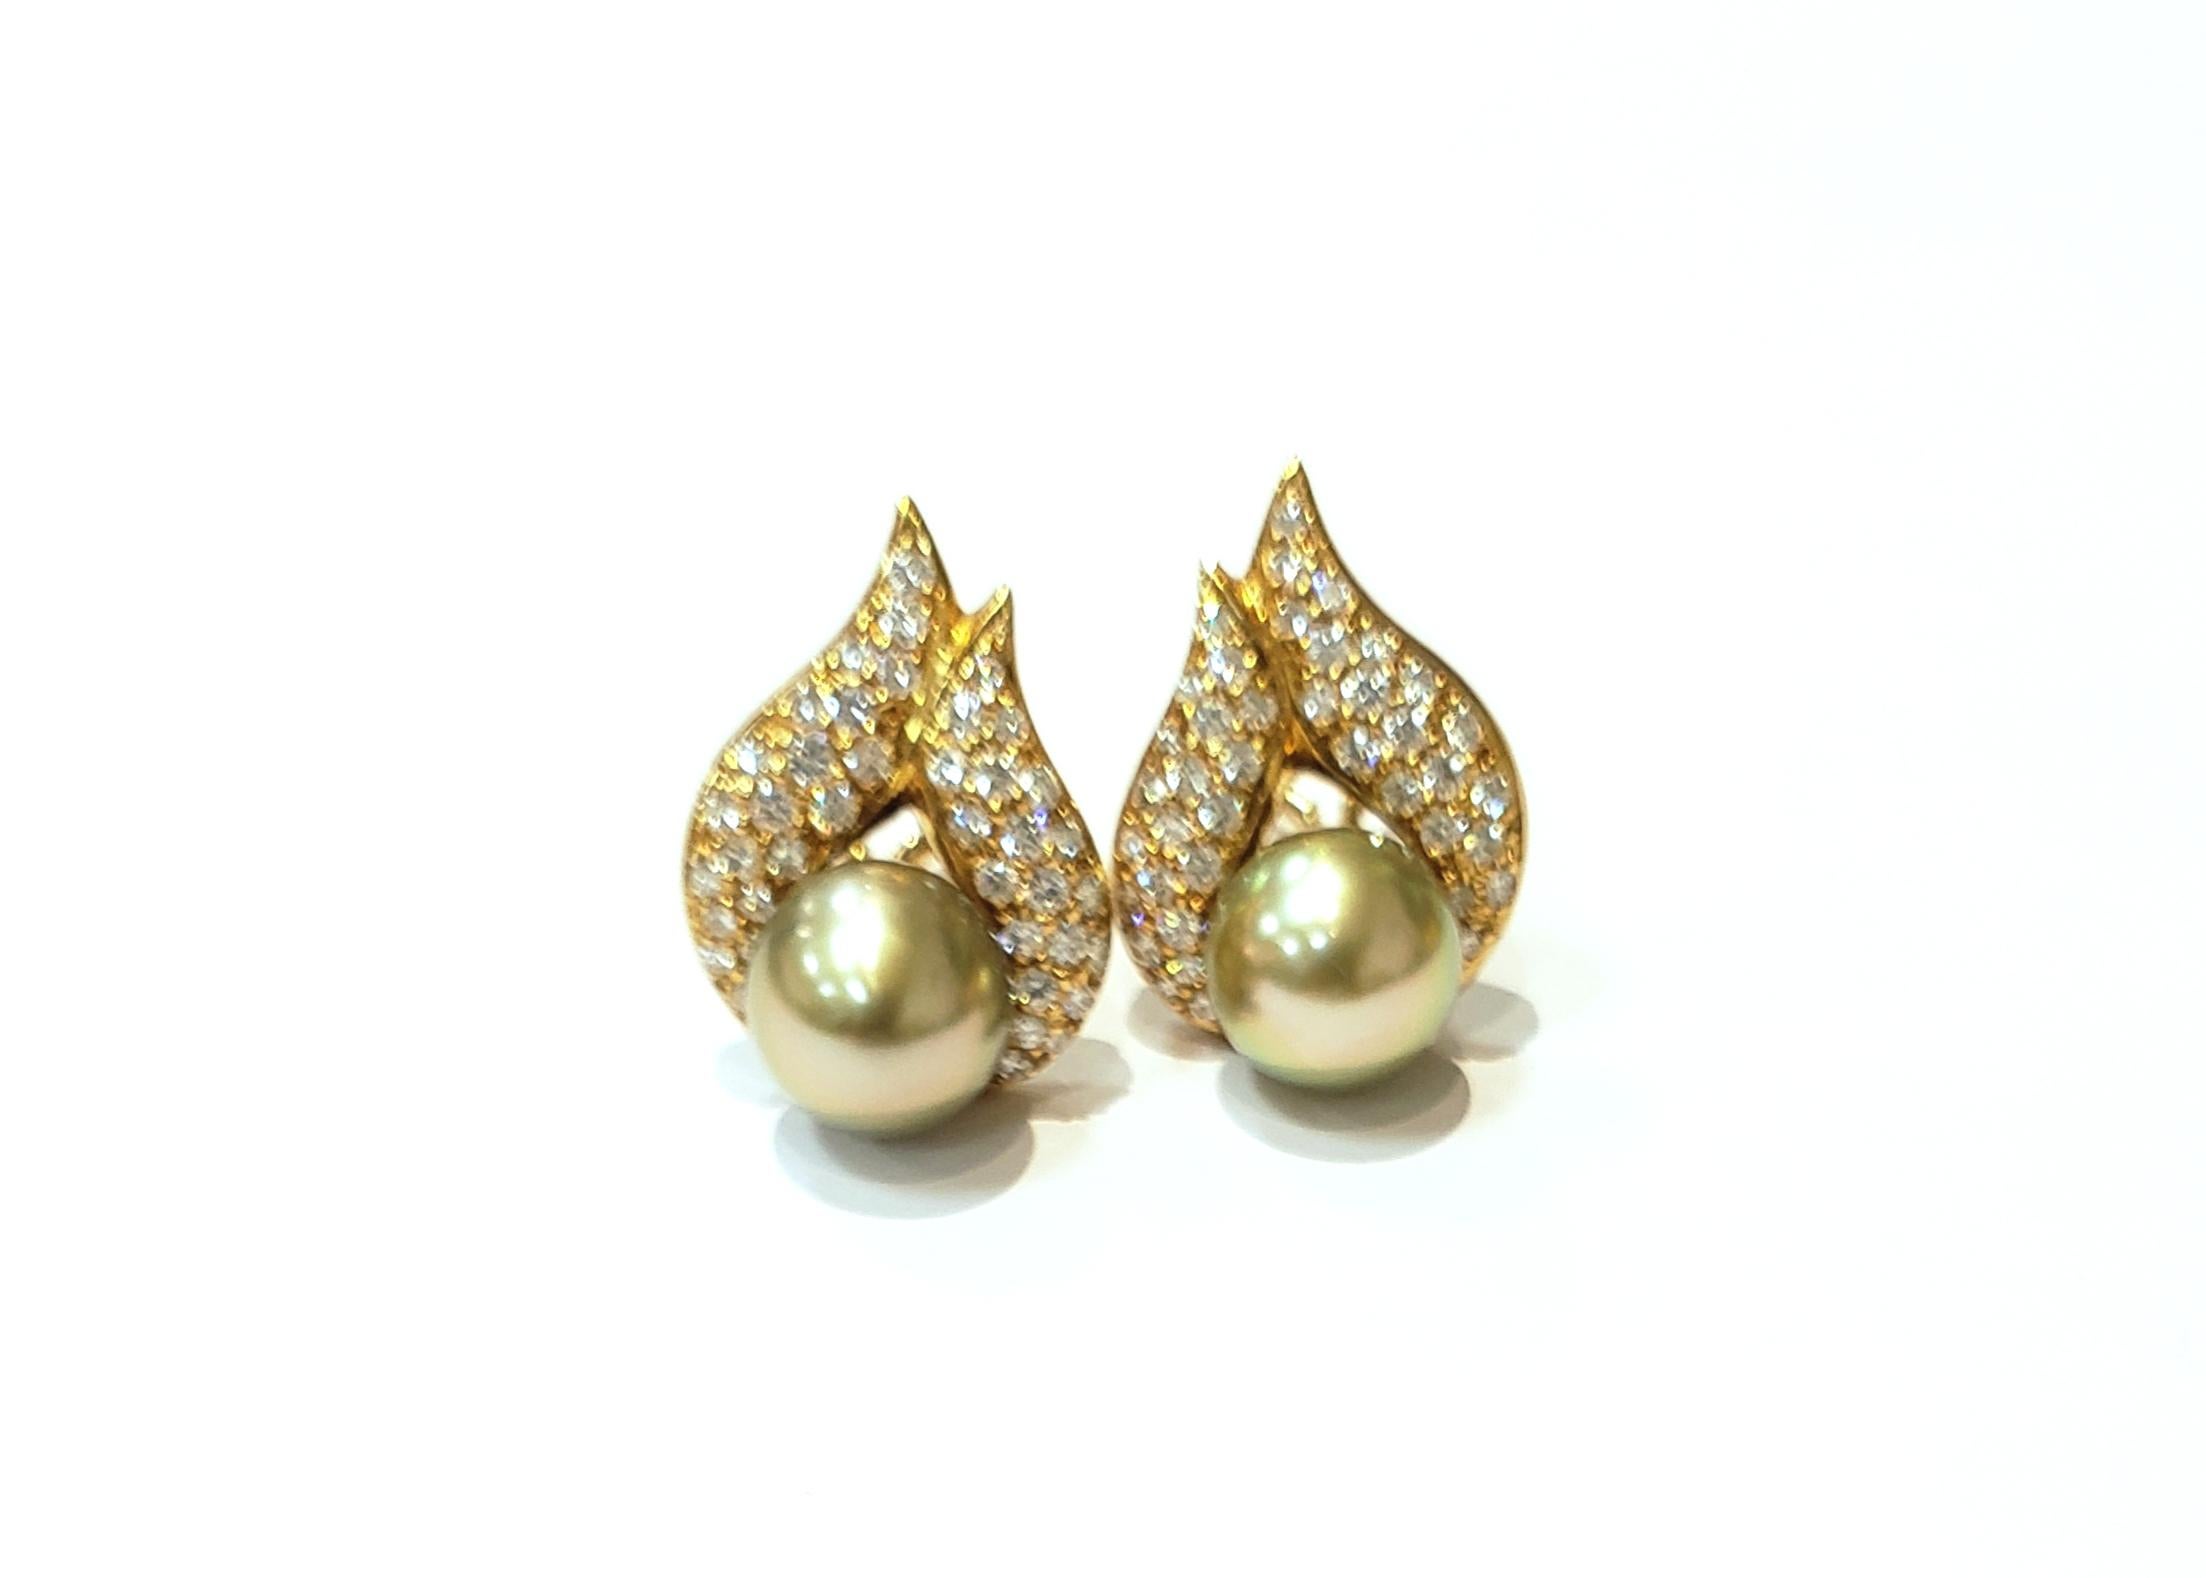 18 karat yellow gold & diamond earrings, each containing a 9mm pistachio pearl. Pave set, full cut diamonds = 1.30 carats
Earrings are clip on style , with a french clip. Pearls are set in bottom center of earring, with a flame of diamonds.
Pearls